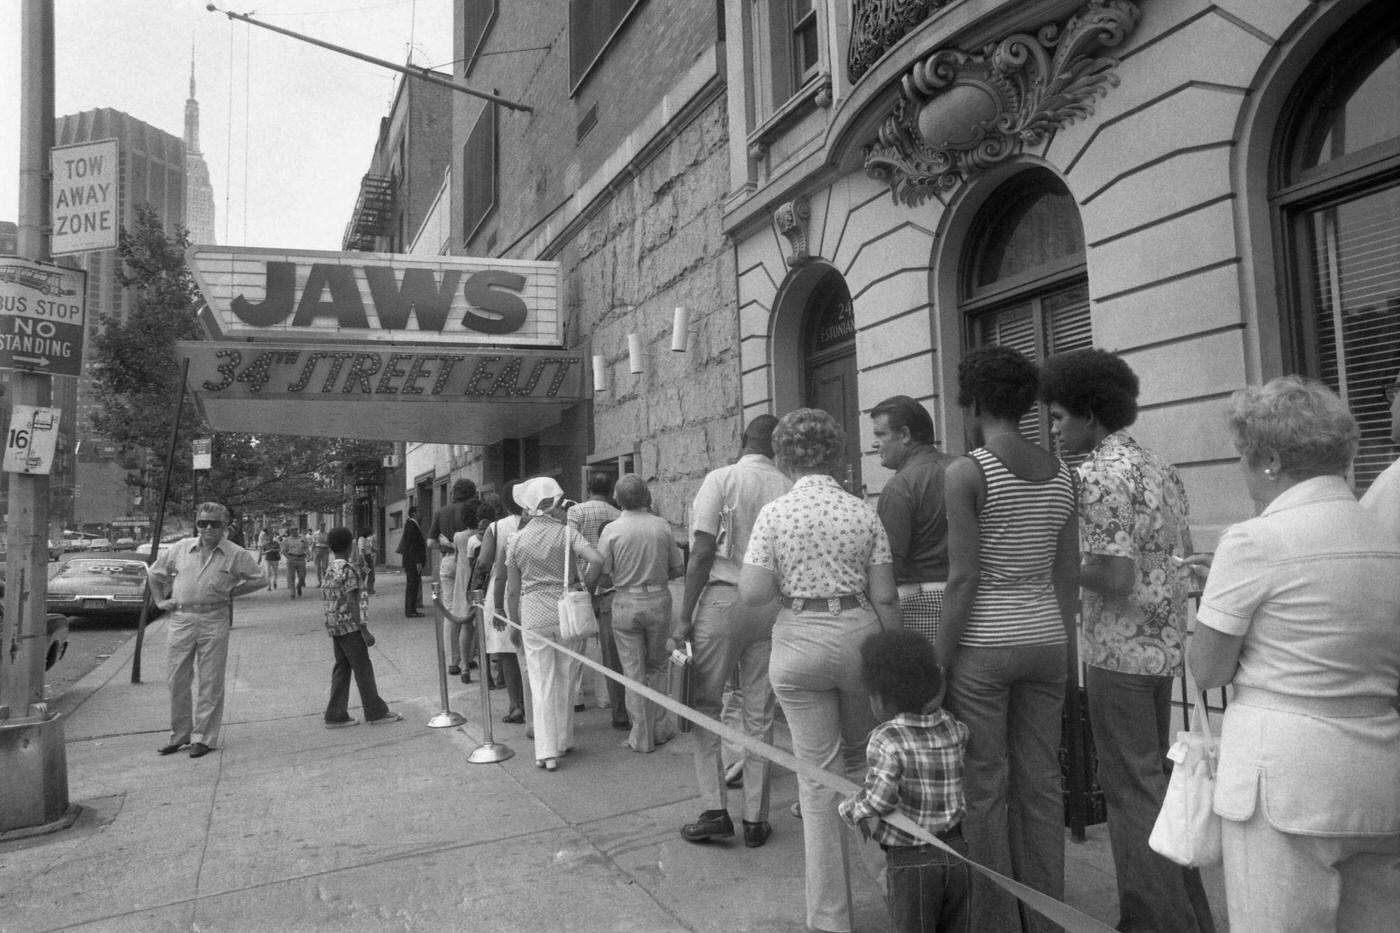 Crowds line up outside movie house for 'Jaws, 1975'